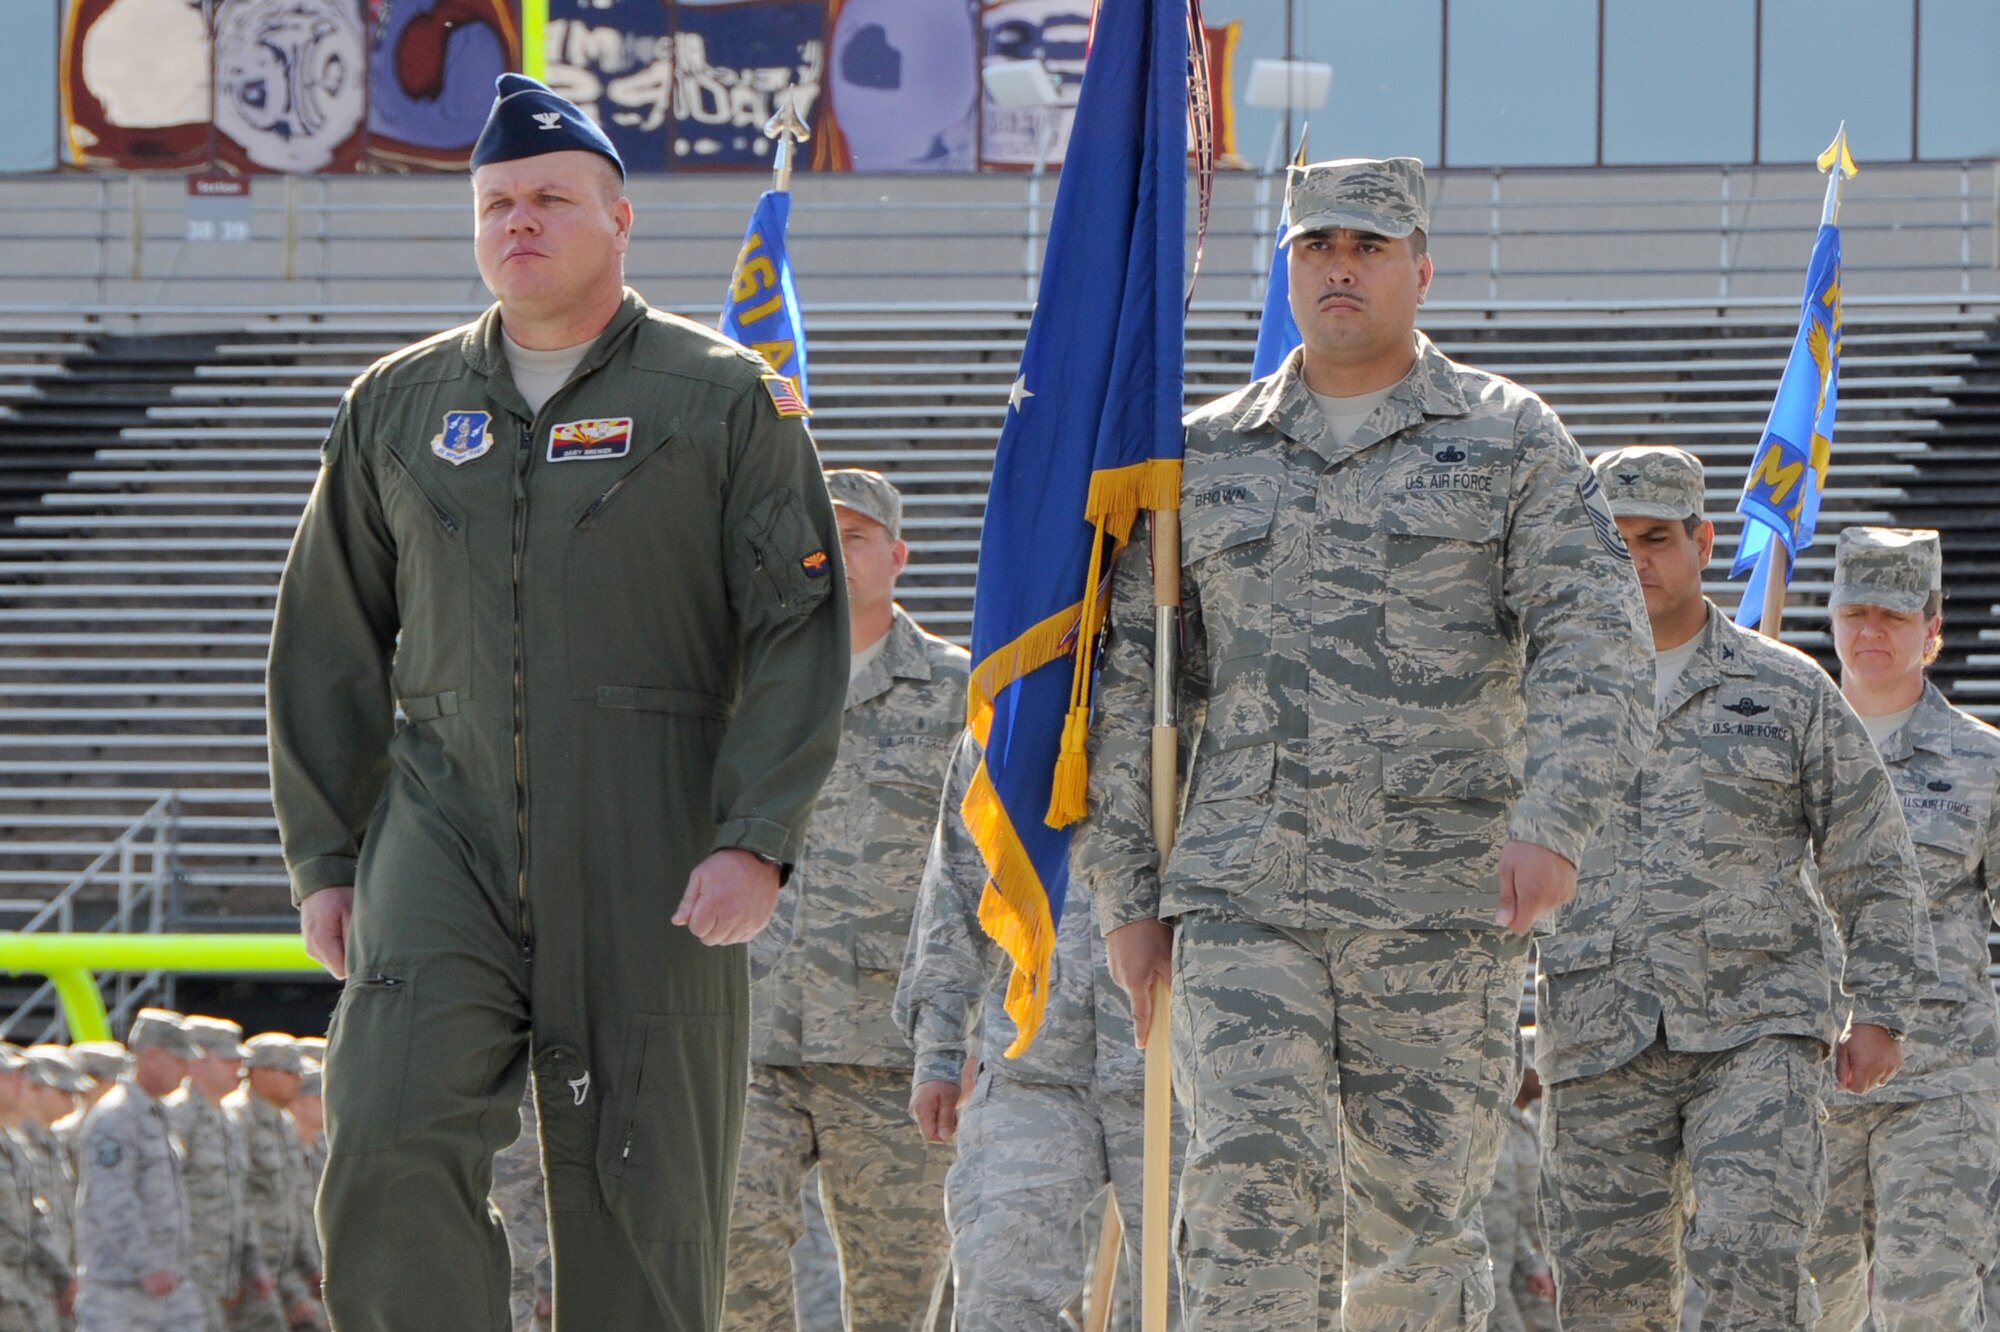 Col. Gary Brewer, 161st Air Refueling Wing commander, leads a formation during the first-ever Arizona National Guard Muster, Dec. 7, 2014, at Sun Devil Stadium in Phoenix.  Brewer, the 13th officer to lead Arizona's KC-135 Stratotanker unit, will retire from the Air Force Dec. 5 after 26 years of service. (U.S. Air National Guard photo by Tech. Sgt. Courtney Enos)